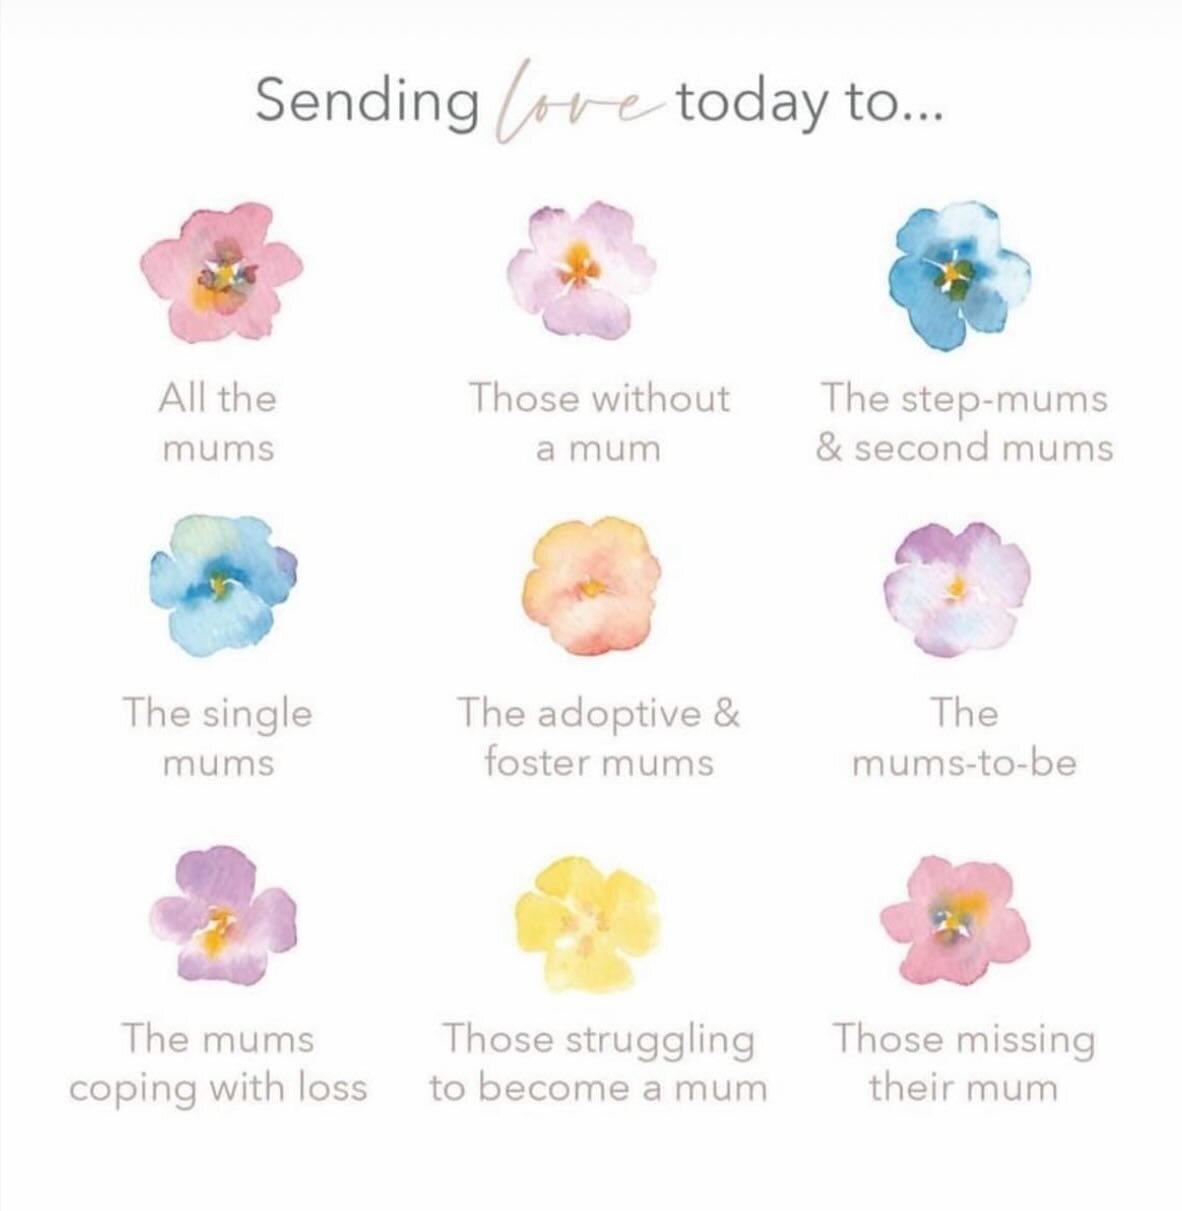 🌸Happy Mother&rsquo;s Day to all our community. 🌸
To those who are, those who should have been, those who long to be, those who choose not to be, those who miss their Mums. To everyone just trying to make it through. 
💕🌸Wishing you a lovely Sunda